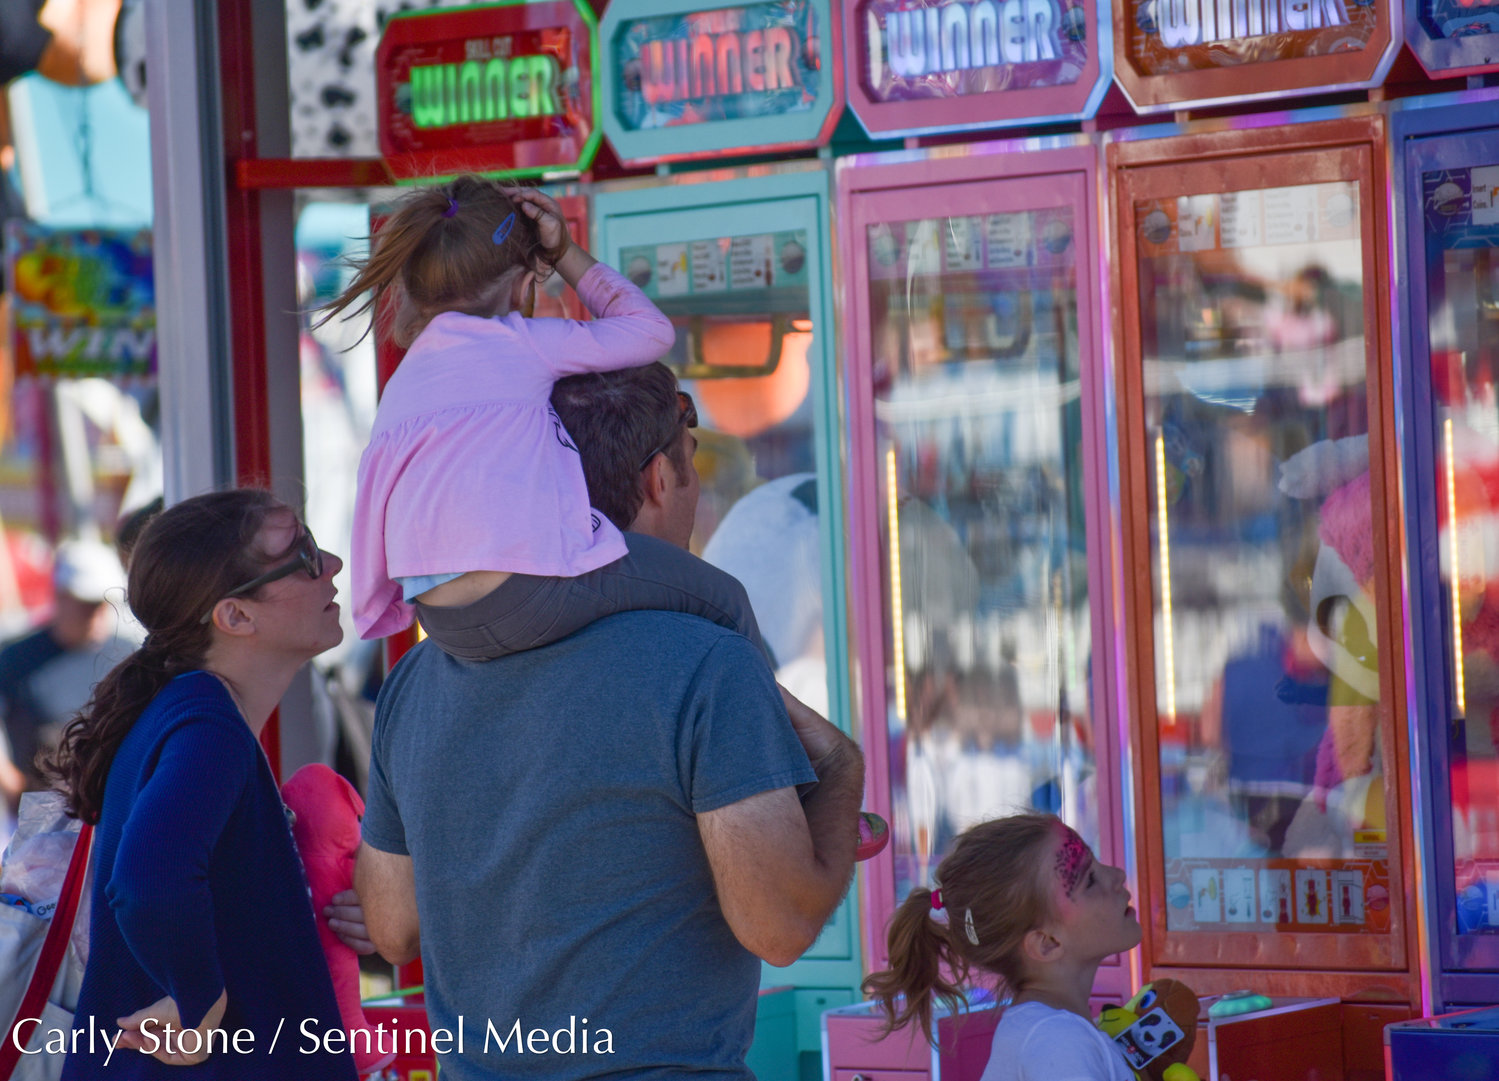 Claw machines and other tests of skill entertain people on the fair midway.